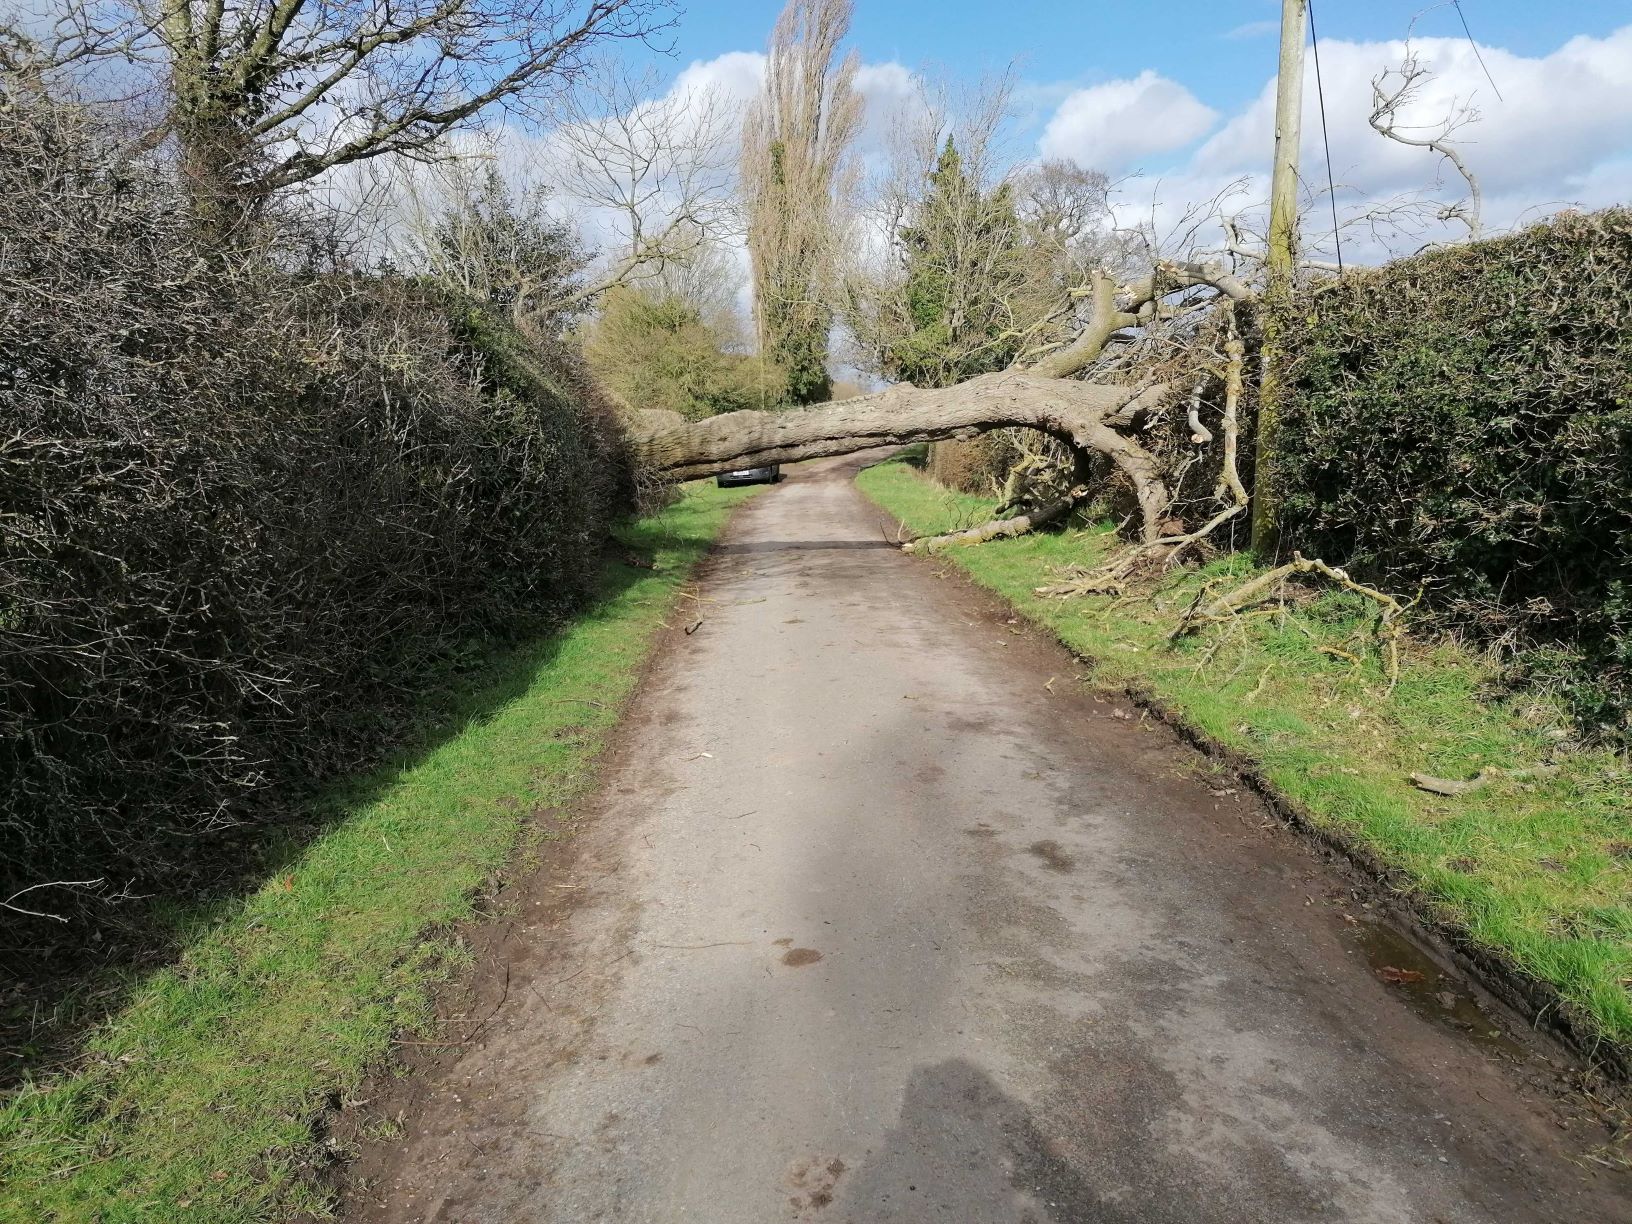 Tree down by the Highlands (Bunsley bank), March 11th